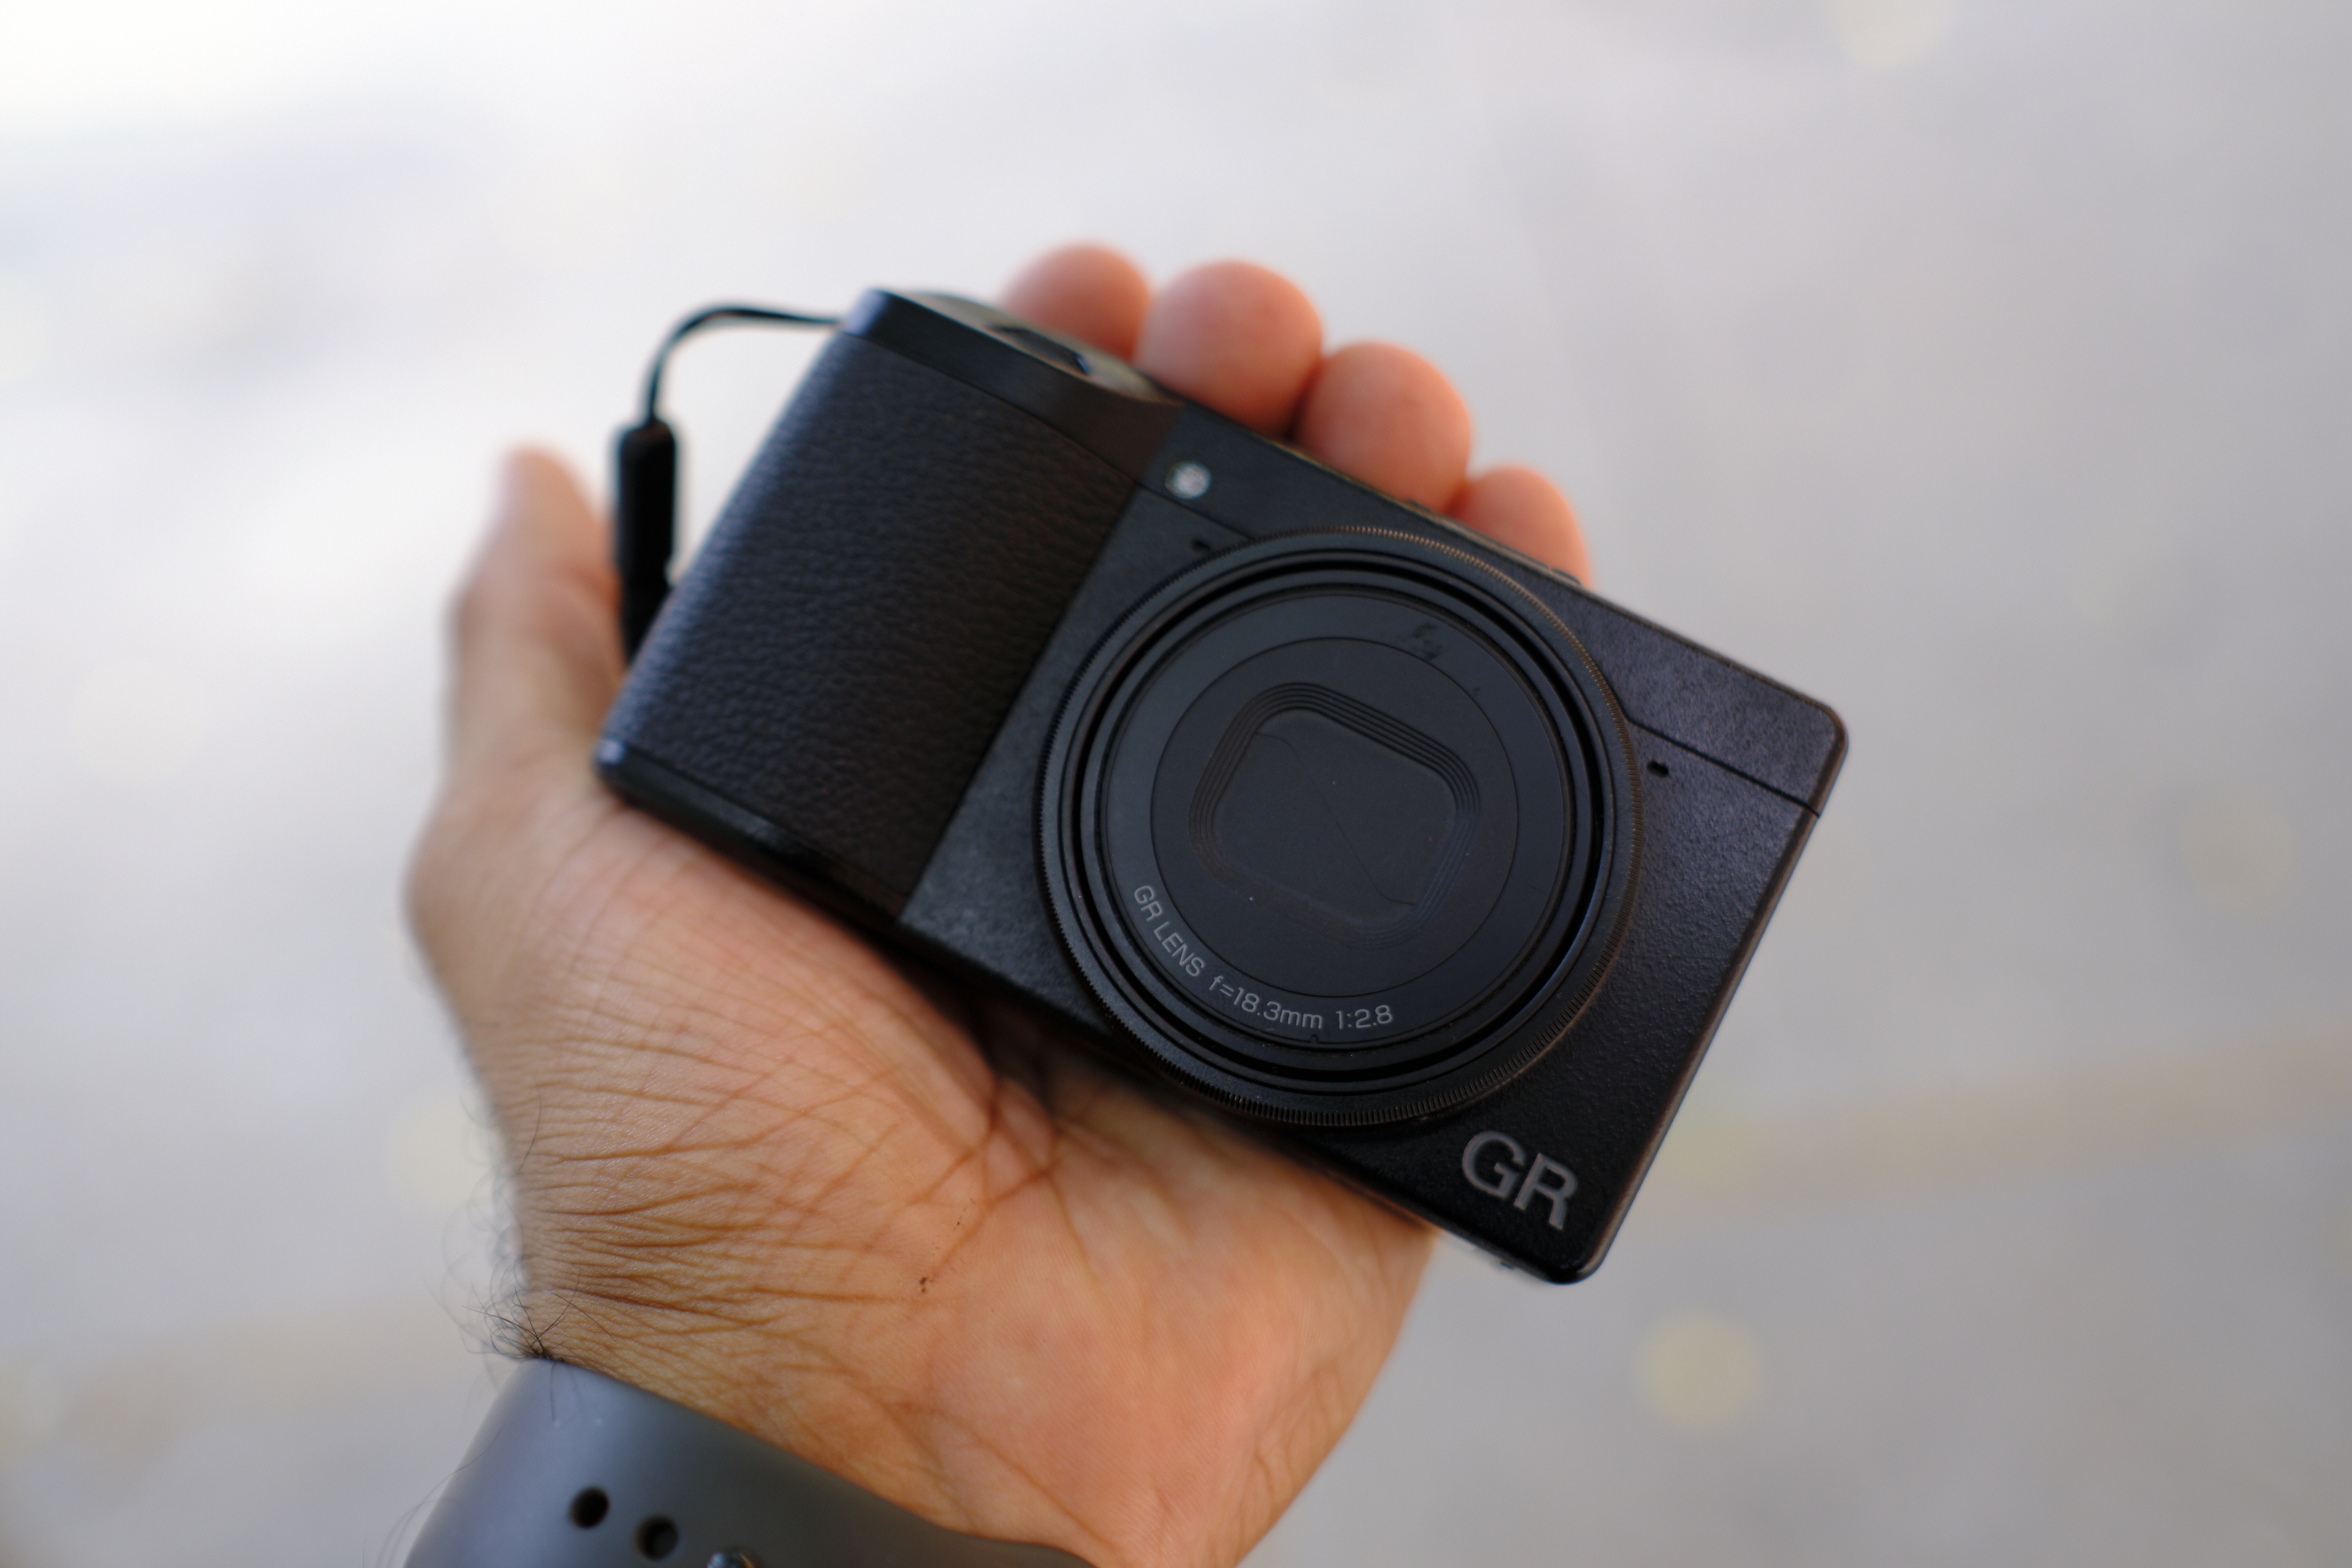 Review: Ricoh GR III (An Almost Perfect Street Photography Camera)